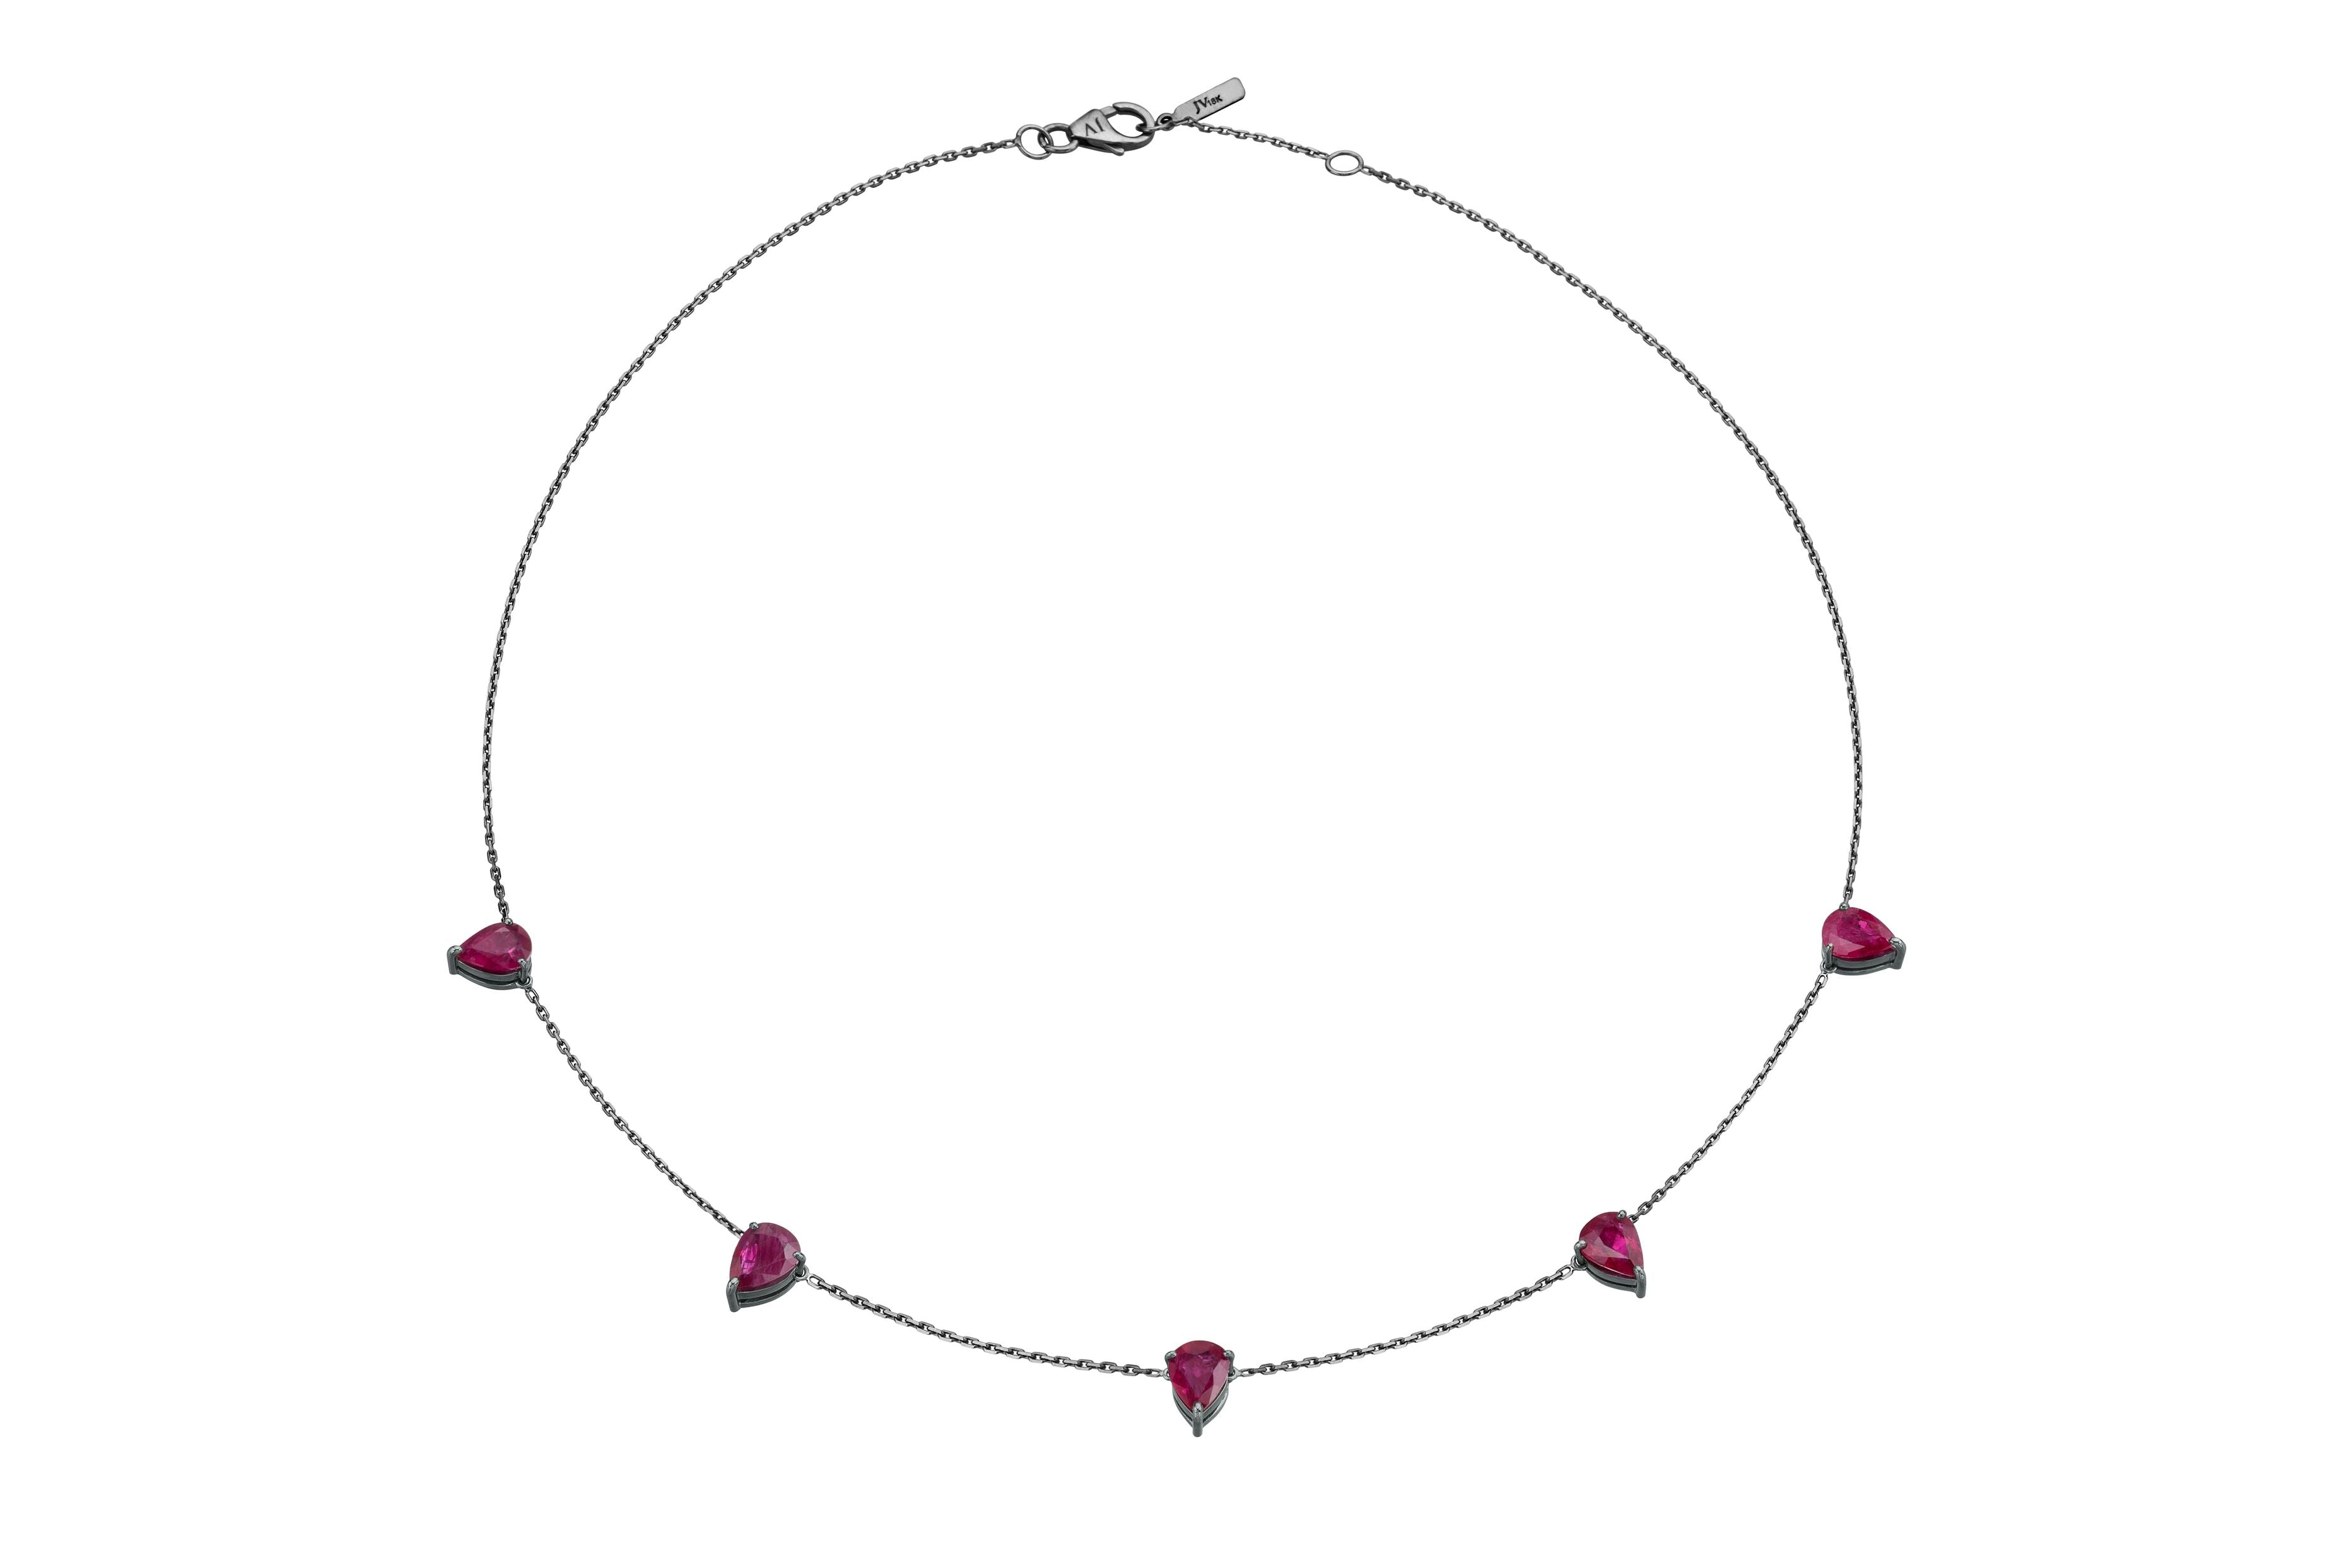 CHOKER DROP IN BLACK RHODIUM PLATED 18K WHITE GOLD WITH RUBY